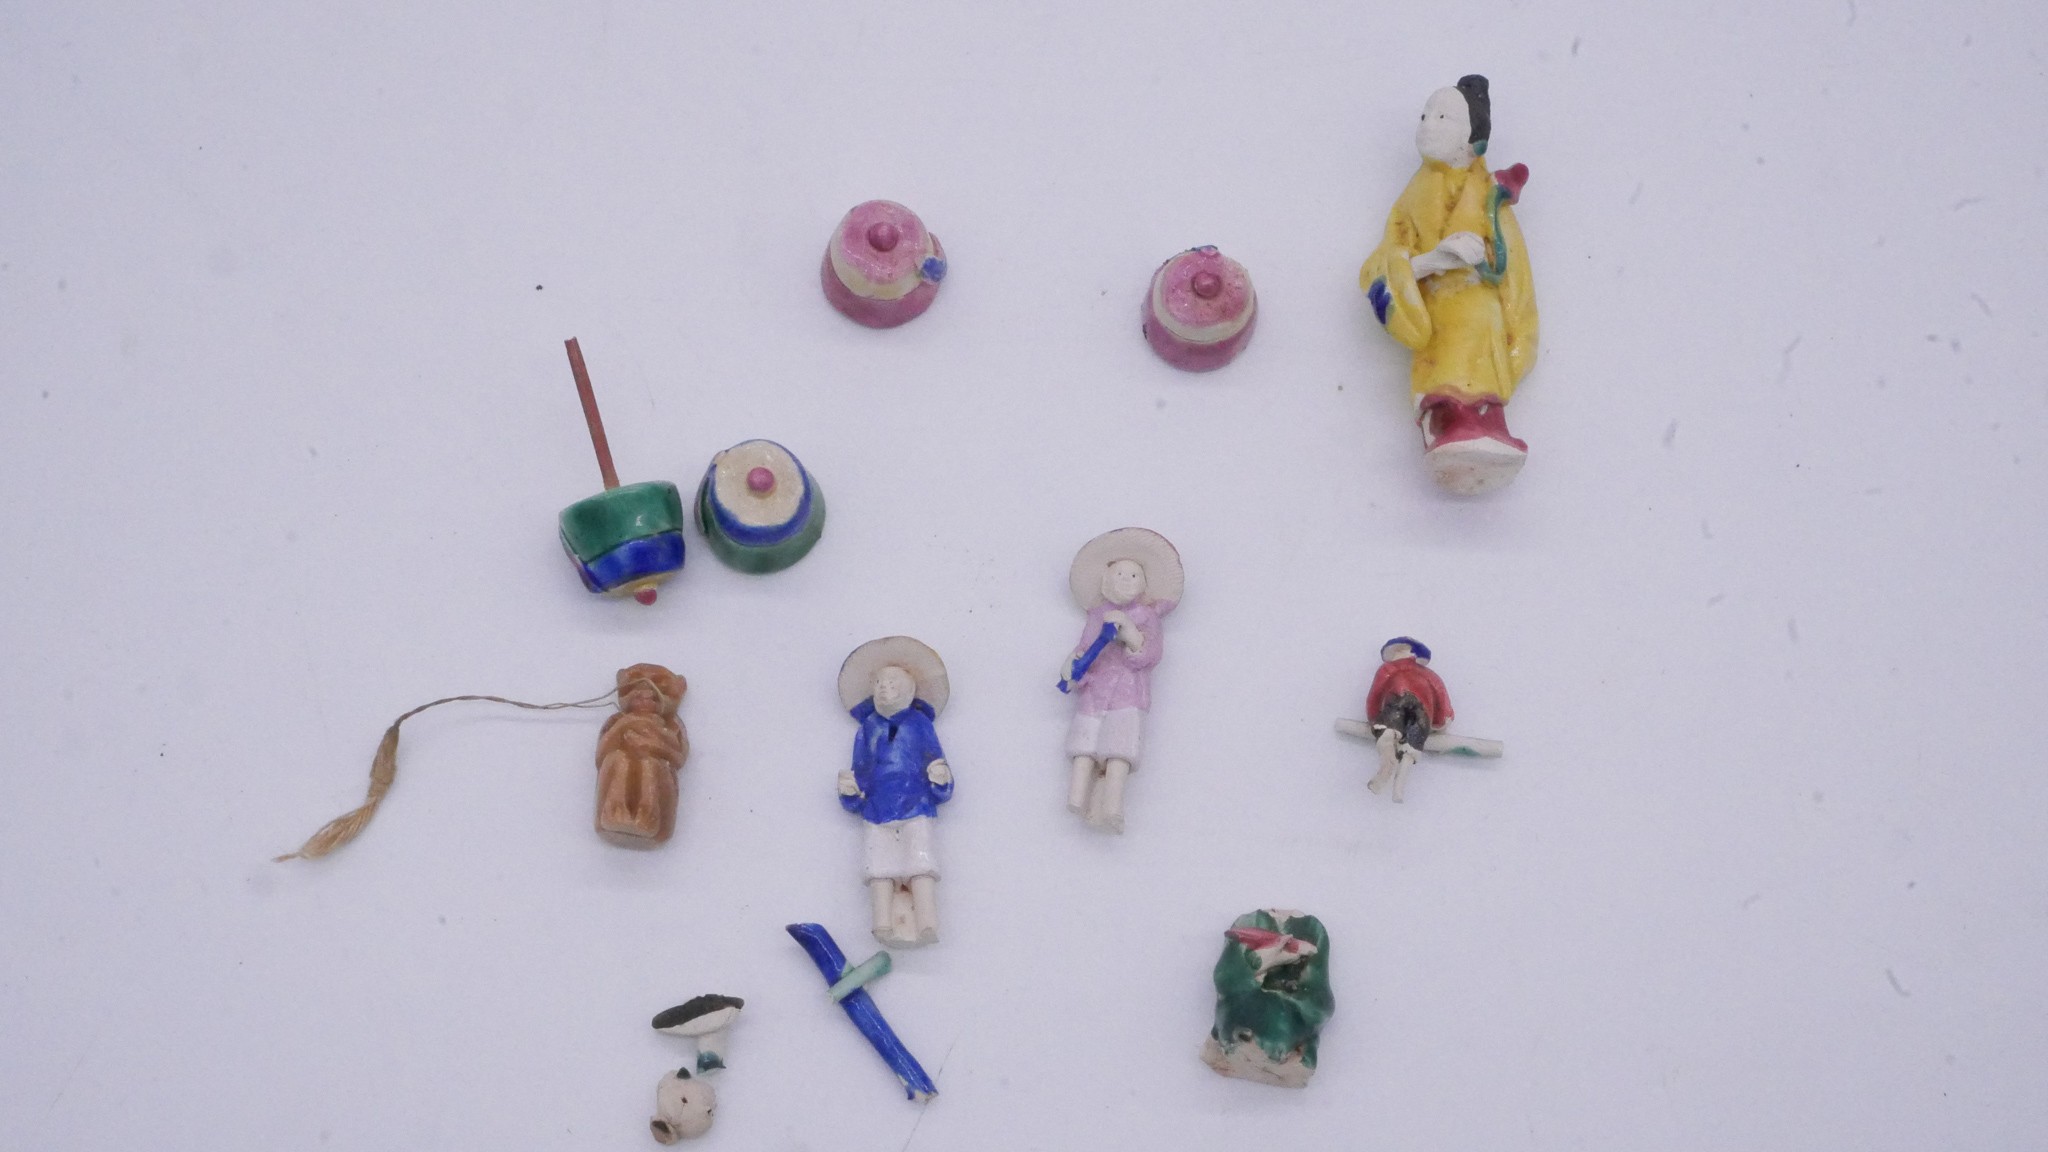 A collection of Chinese hand painted ceramic miniature figures along with a painted festival scene - Image 7 of 14